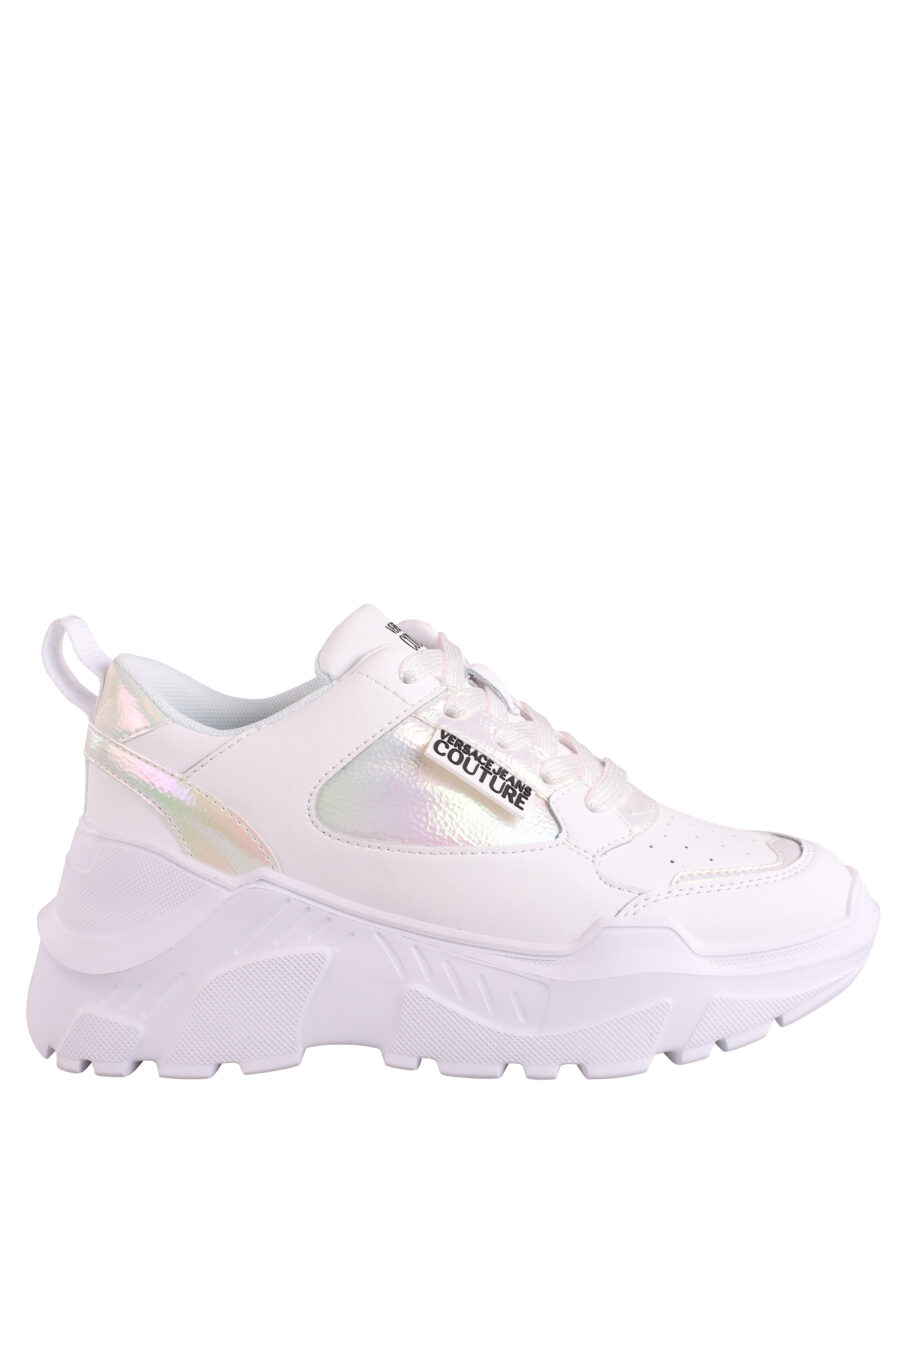 White trainers with hologram details and platform - IMG 9011